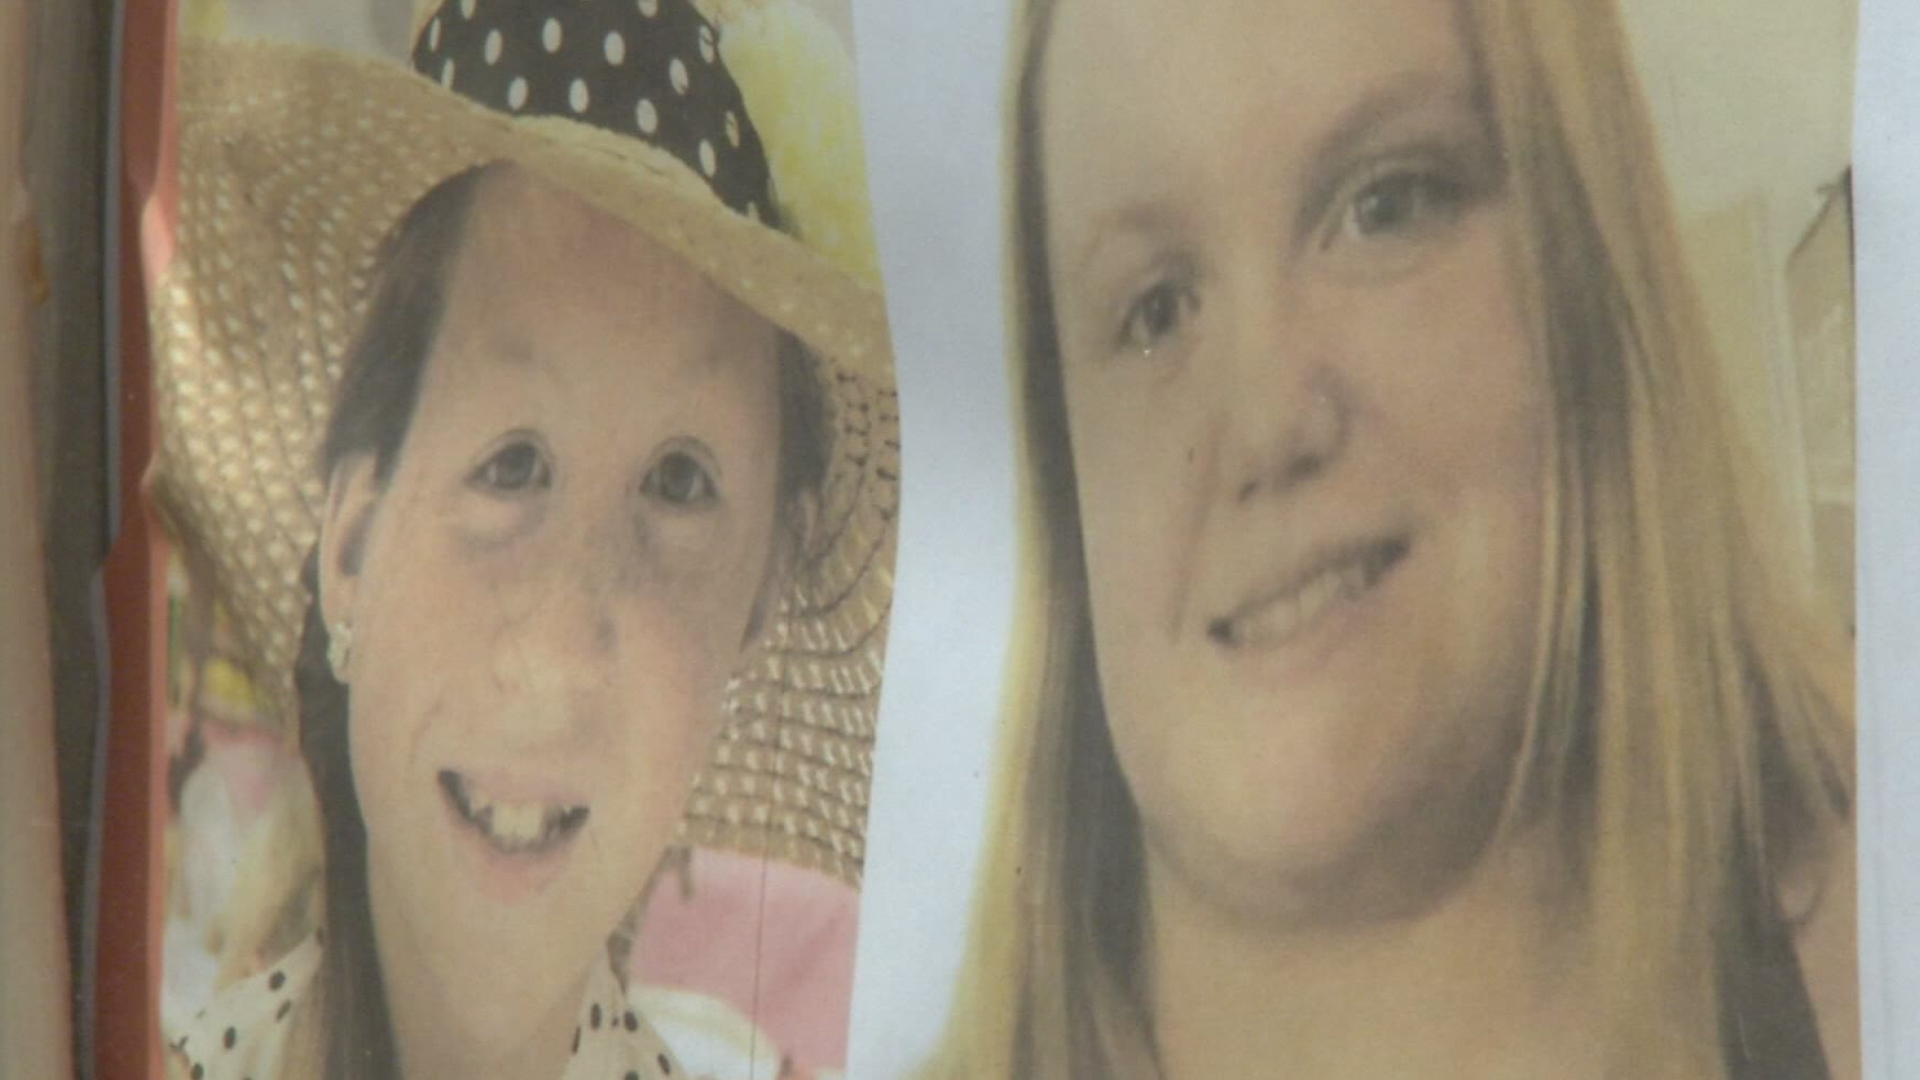 Investigators working to solve the murders of Abby Williams and Libby German are moving to a new building to conduct interviews and hold meetings.